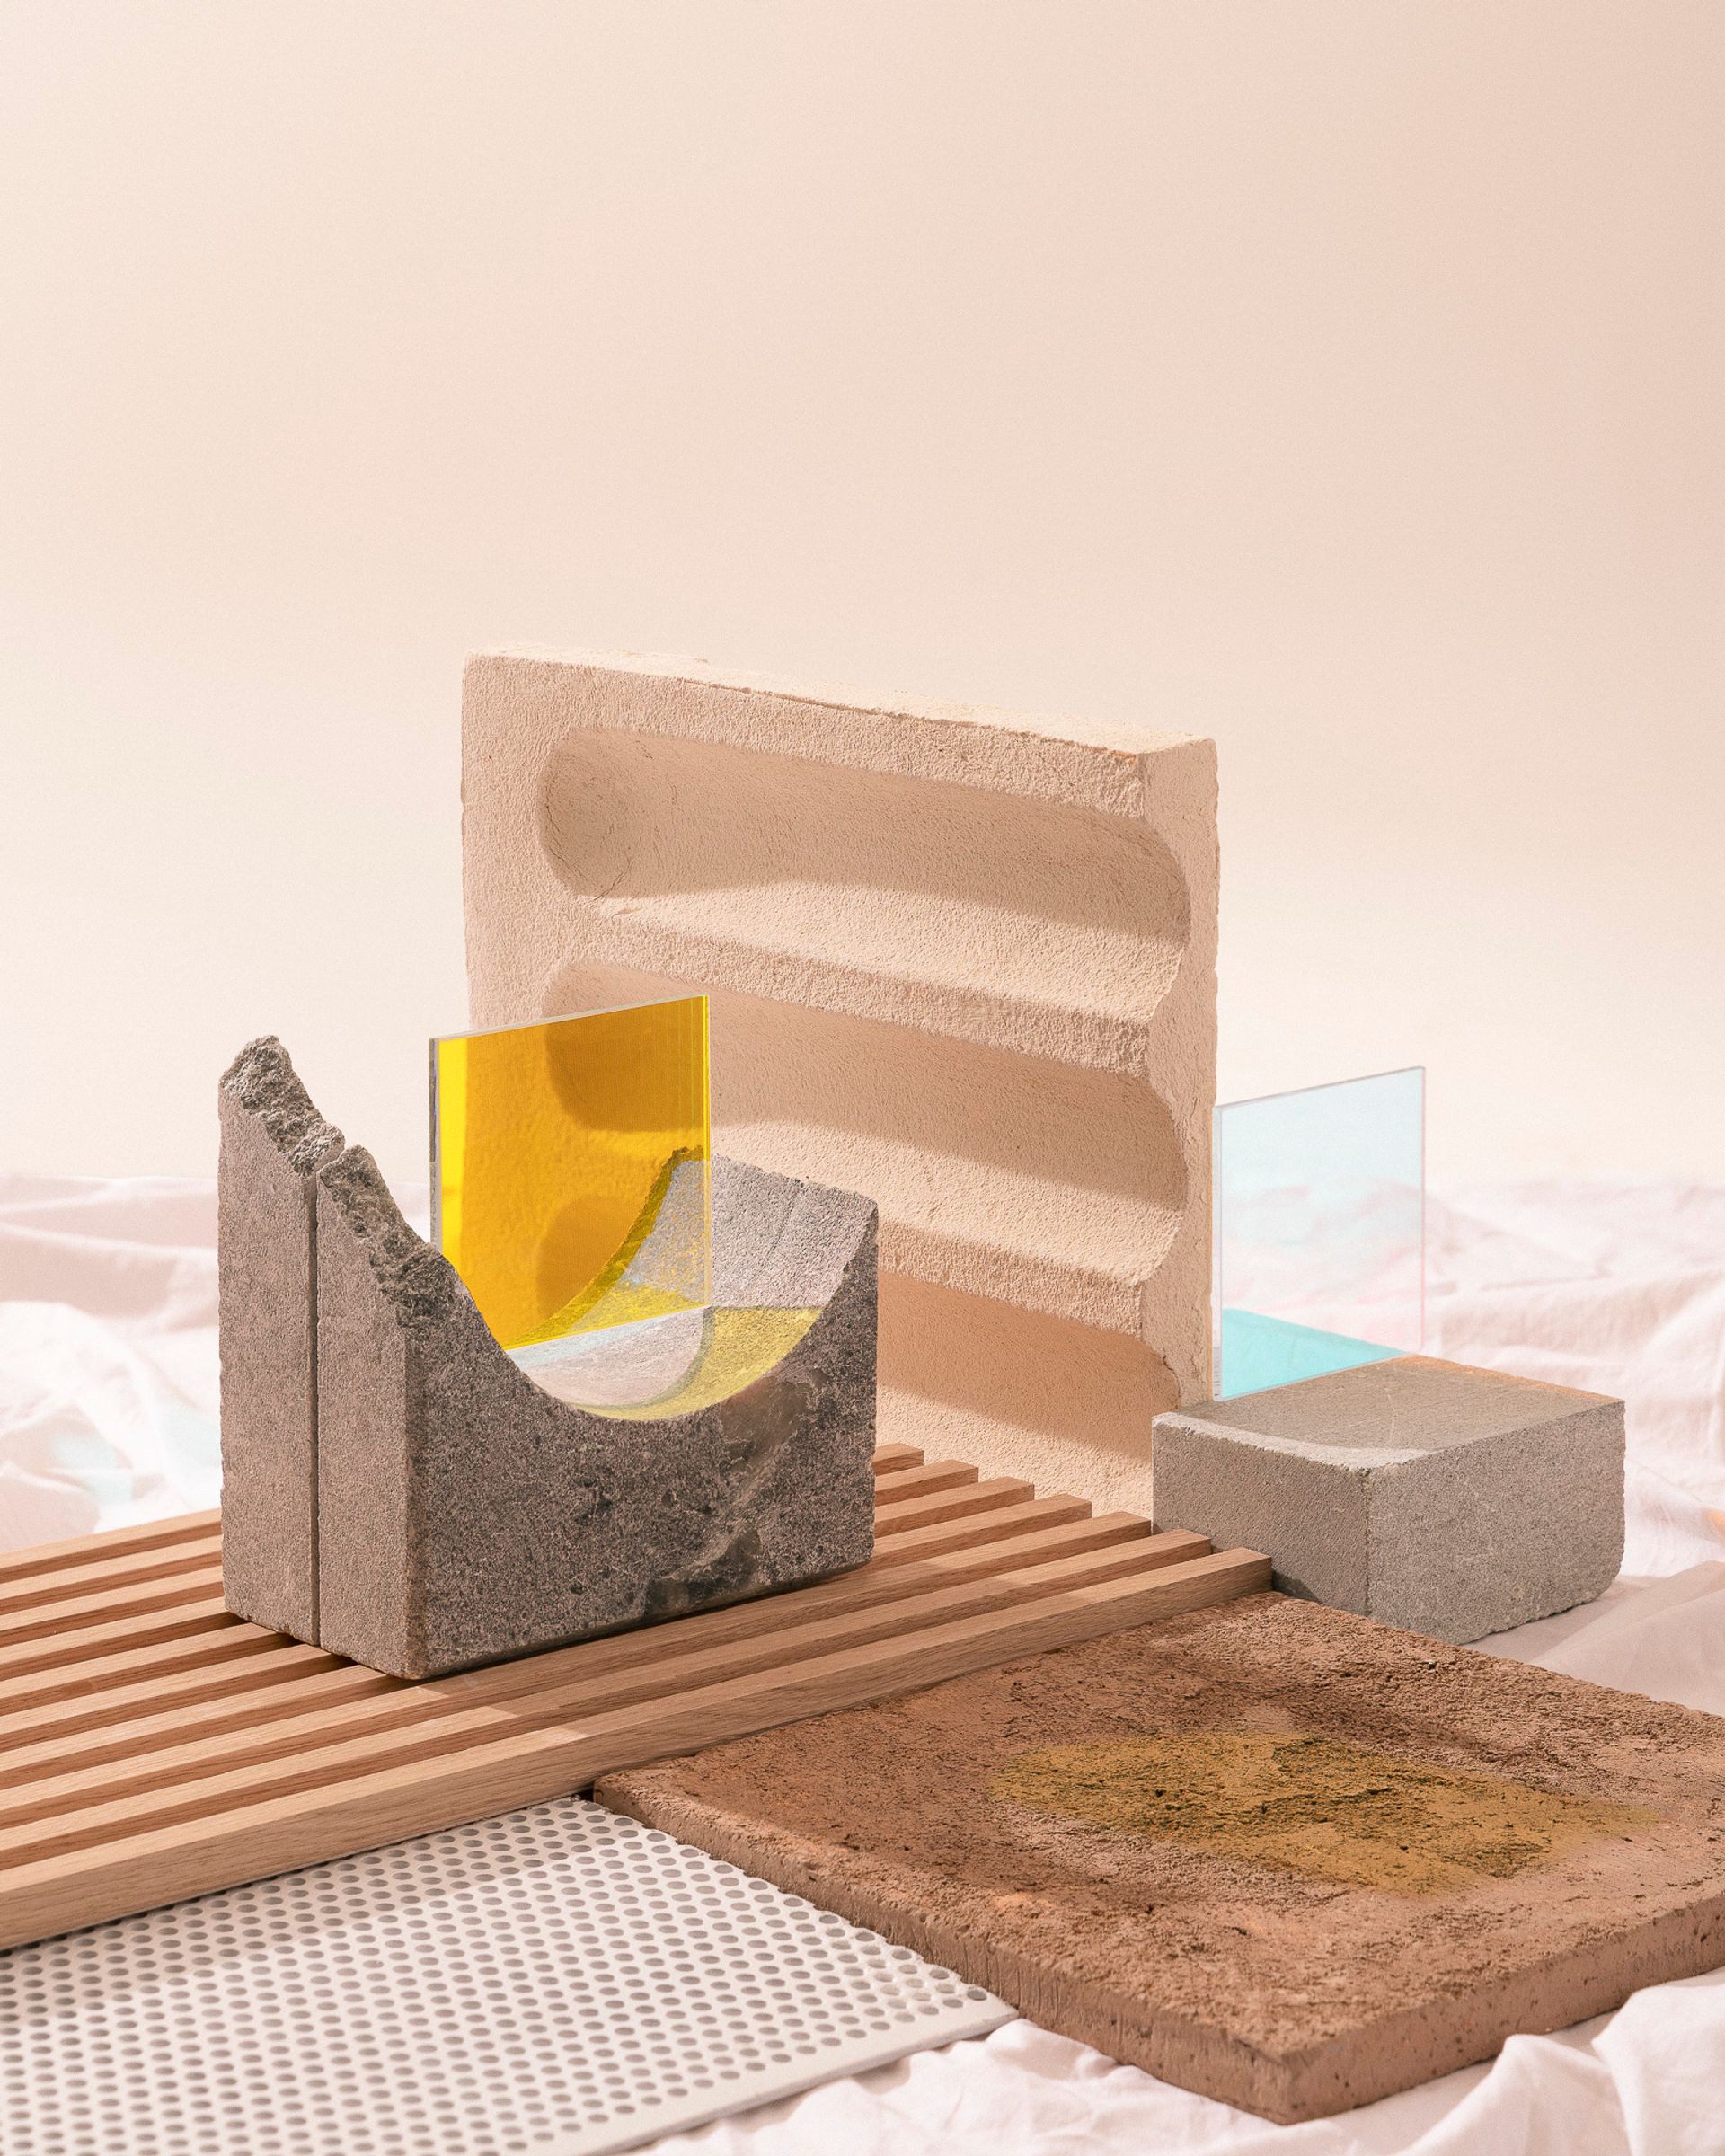 Still life photos materials composition concrete, marble, wood, laminate, glass, tiles, clay. Officina Magisafi architecture design - composition 7